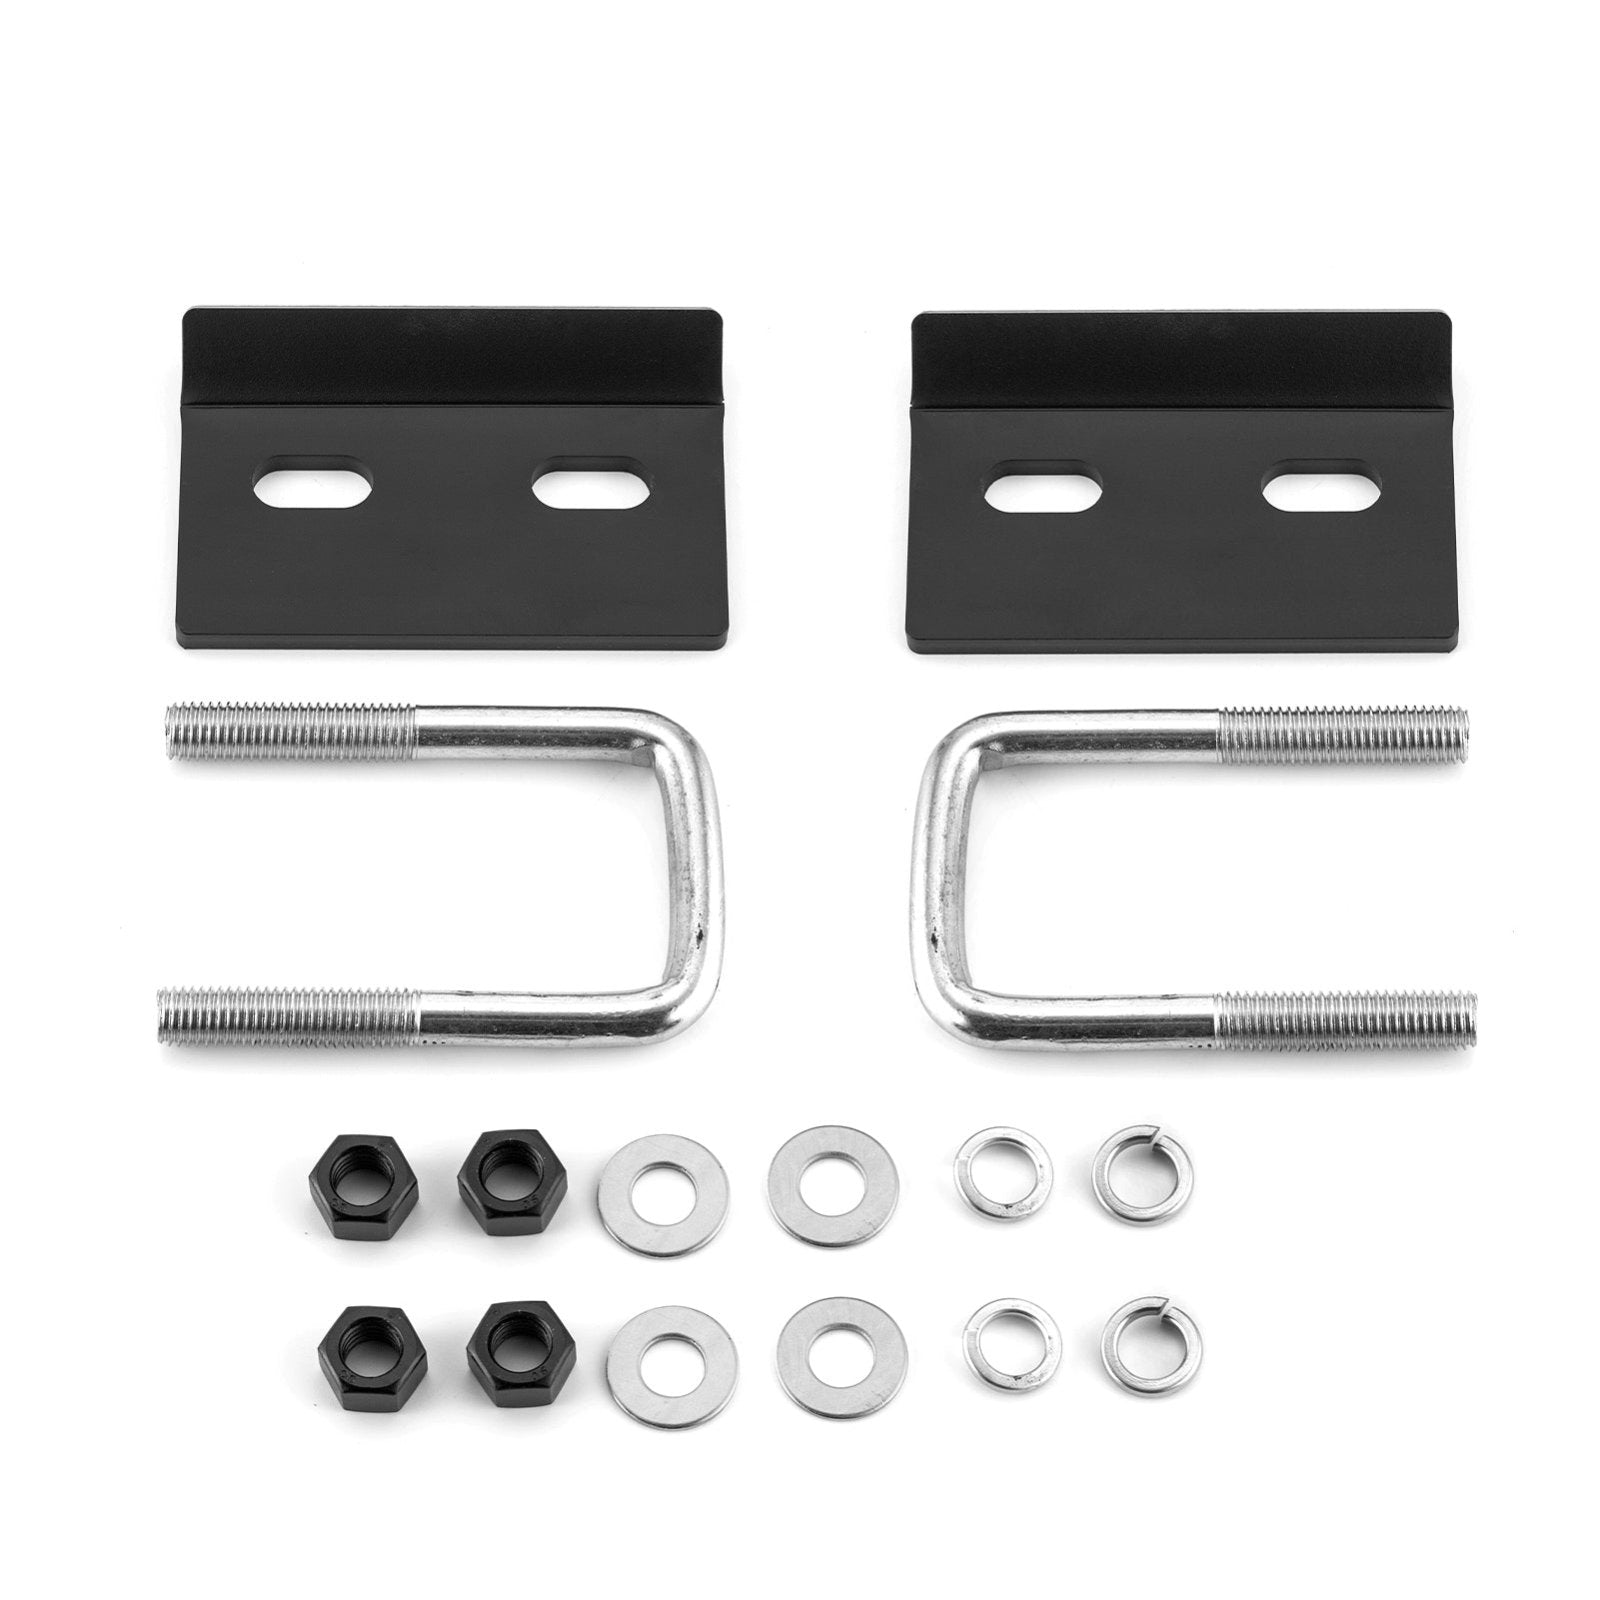 2pcs Universal Hitch Tightener for All 1.25" and 2" Hitches on Trucks Suv's Vans RV's - Weisen